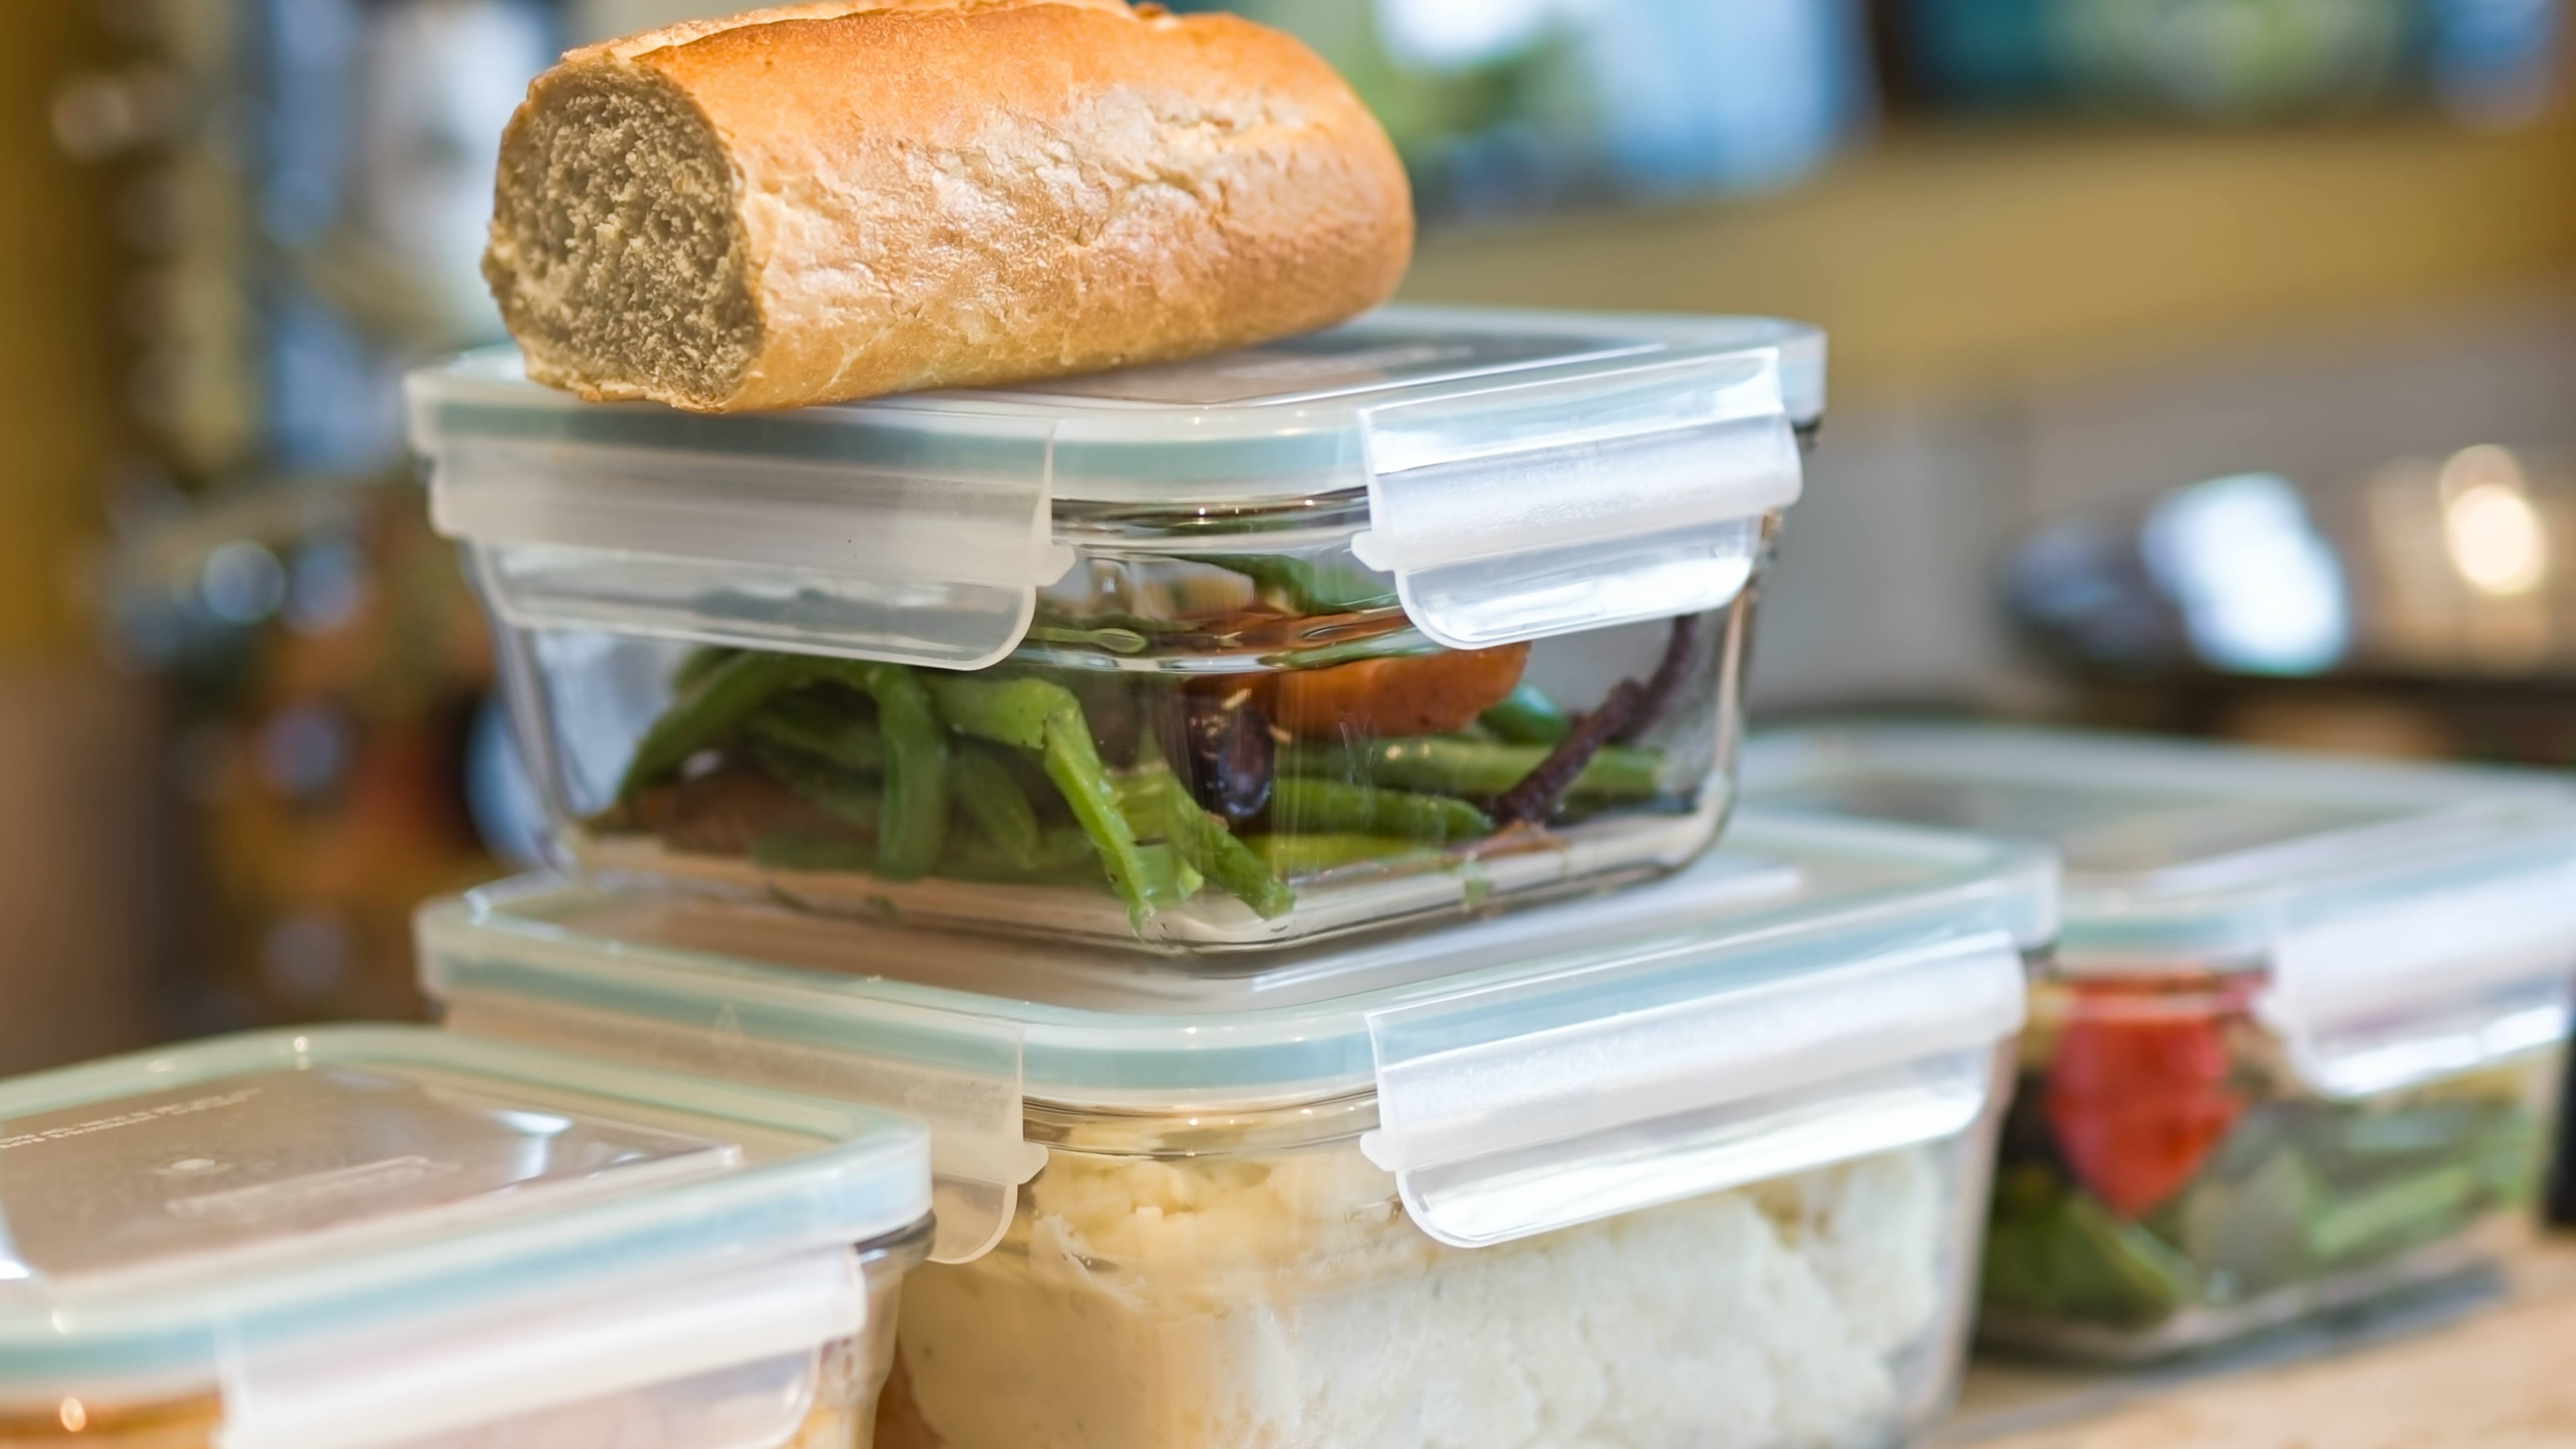 https://newsnetwork.mayoclinic.org/n7-mcnn/7bcc9724adf7b803/uploads/2021/11/several-plastic-containers-with-leftover-food-stacked-on-top-of-each-other-on-a-kitchen-counter-16x9-1.jpg